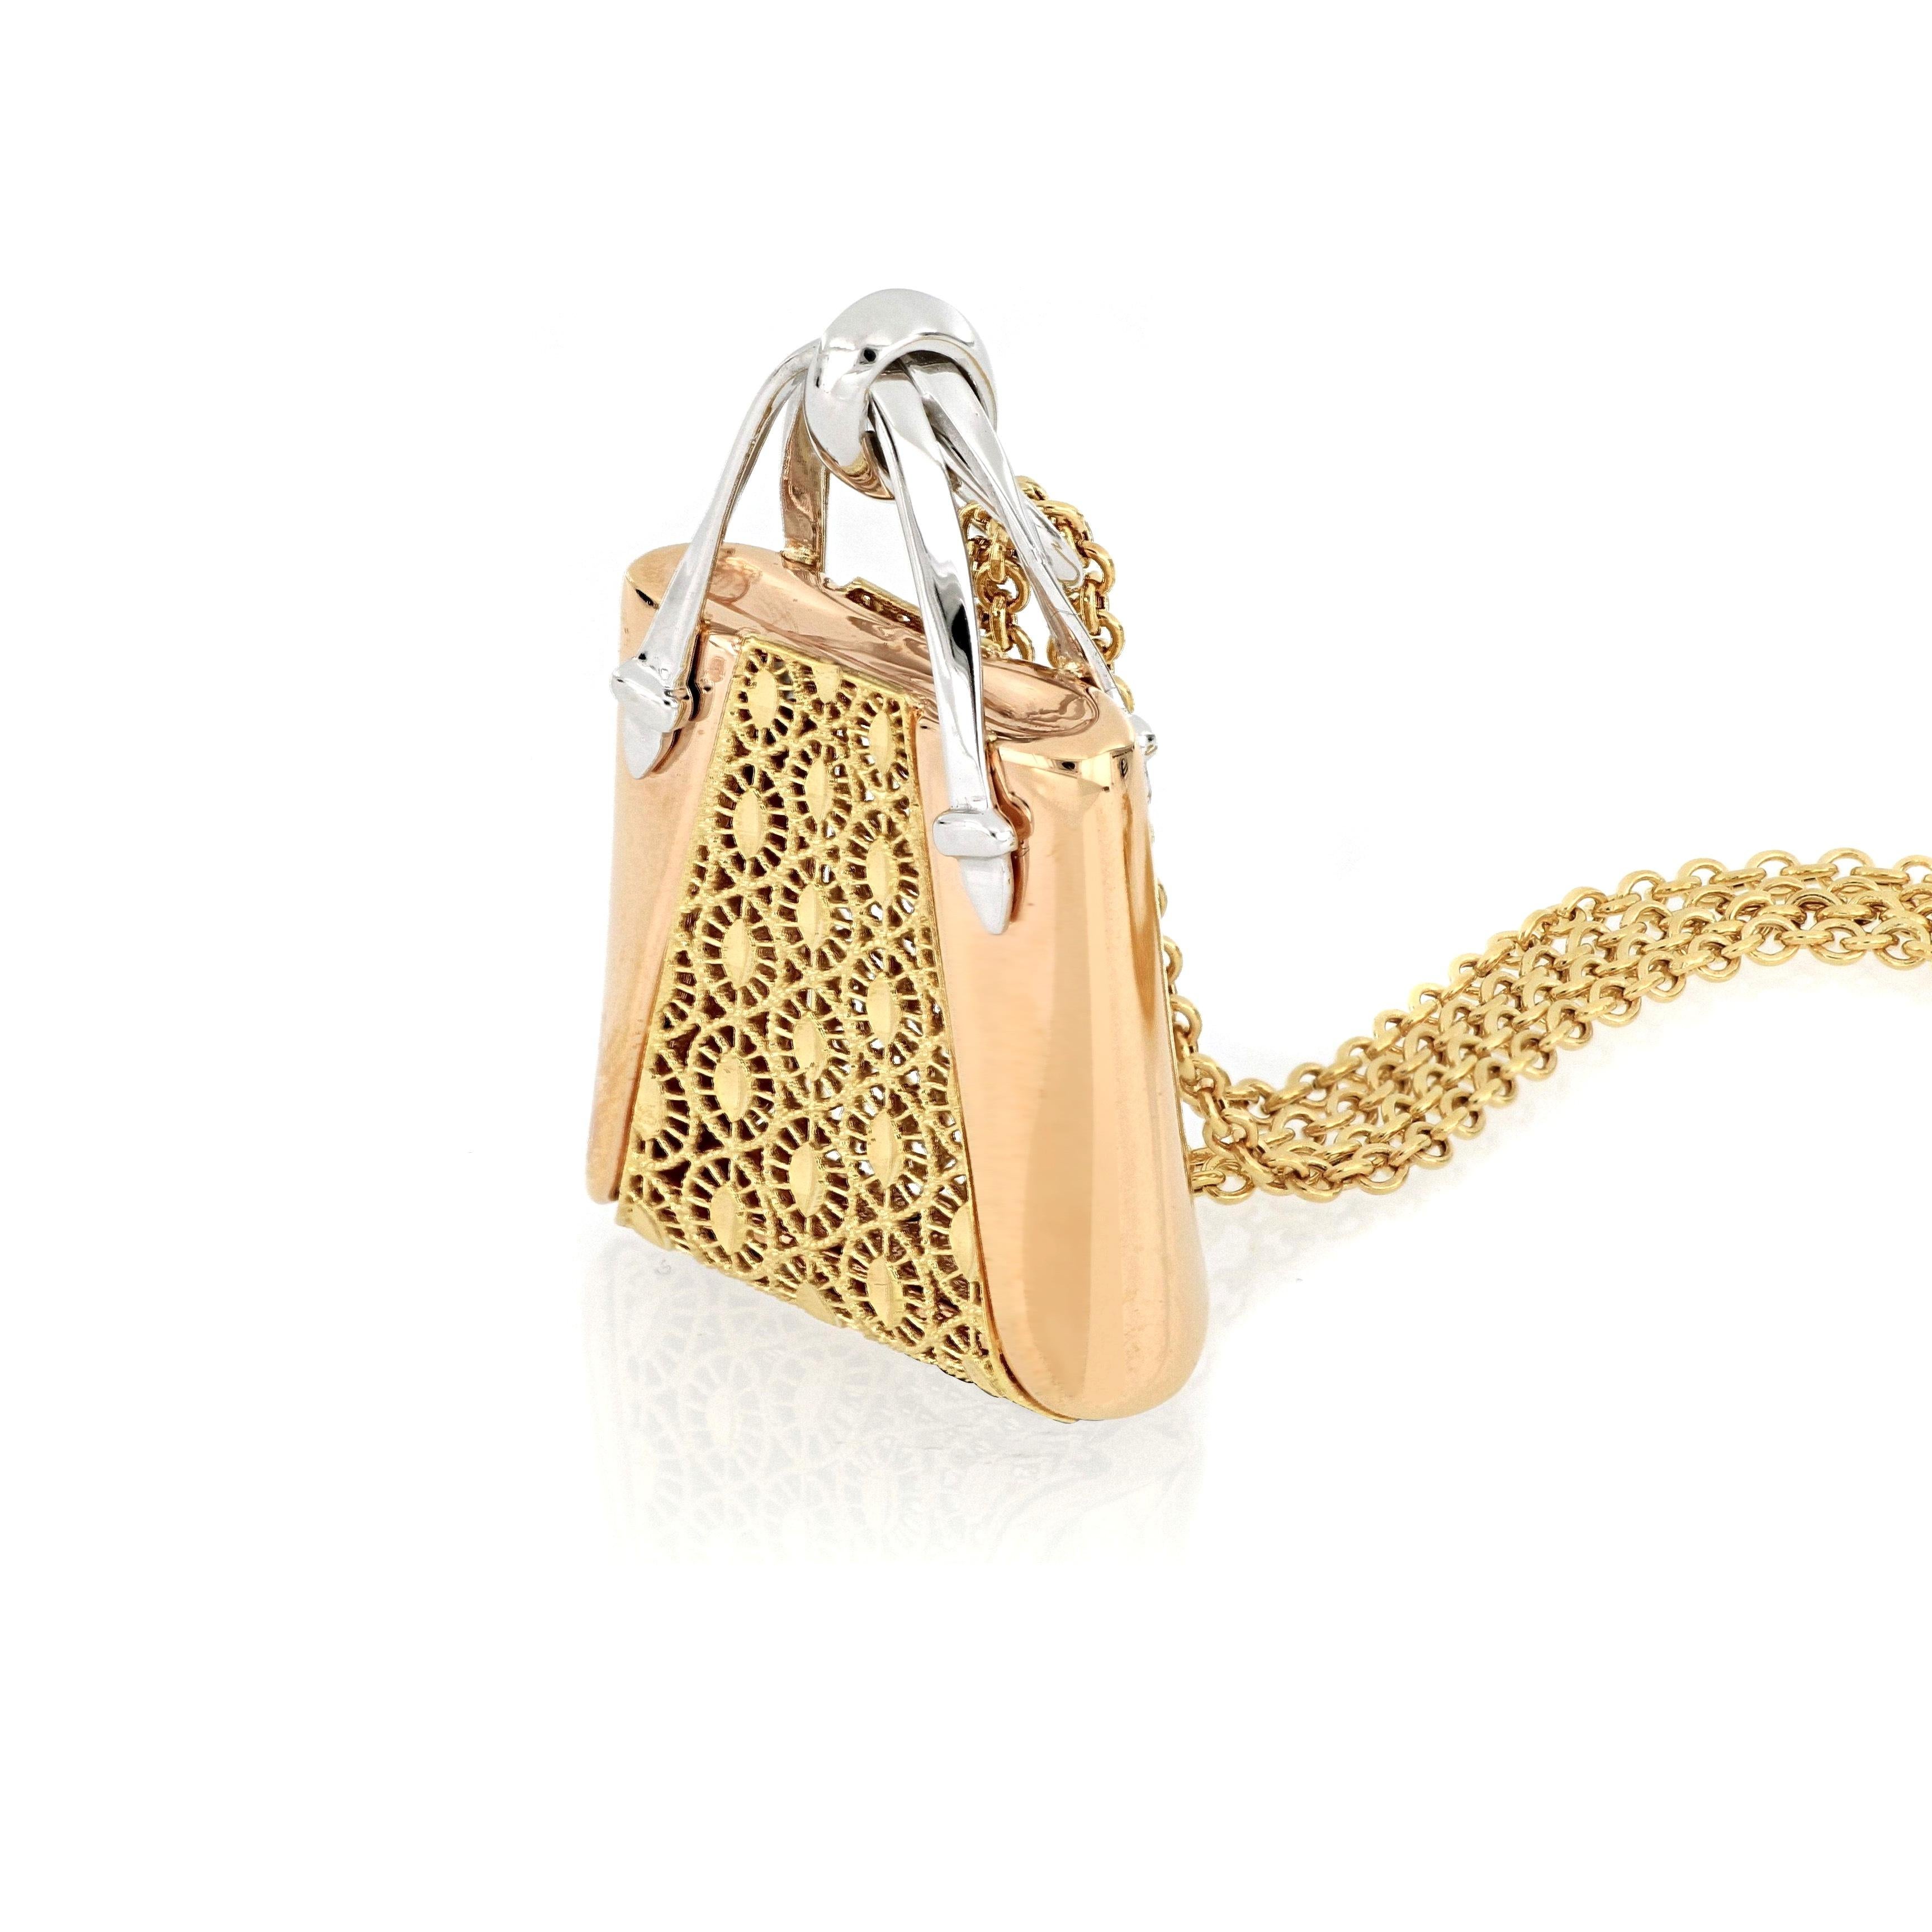 18 karat rose and yellow gold necklace with a handbag pendant, with fabulous design and very fine Italian craftsmanship, suitable for everyday wear. 
O’Che 1867 was founded one and a half centuries ago in Macau. The brand is renowned for its high